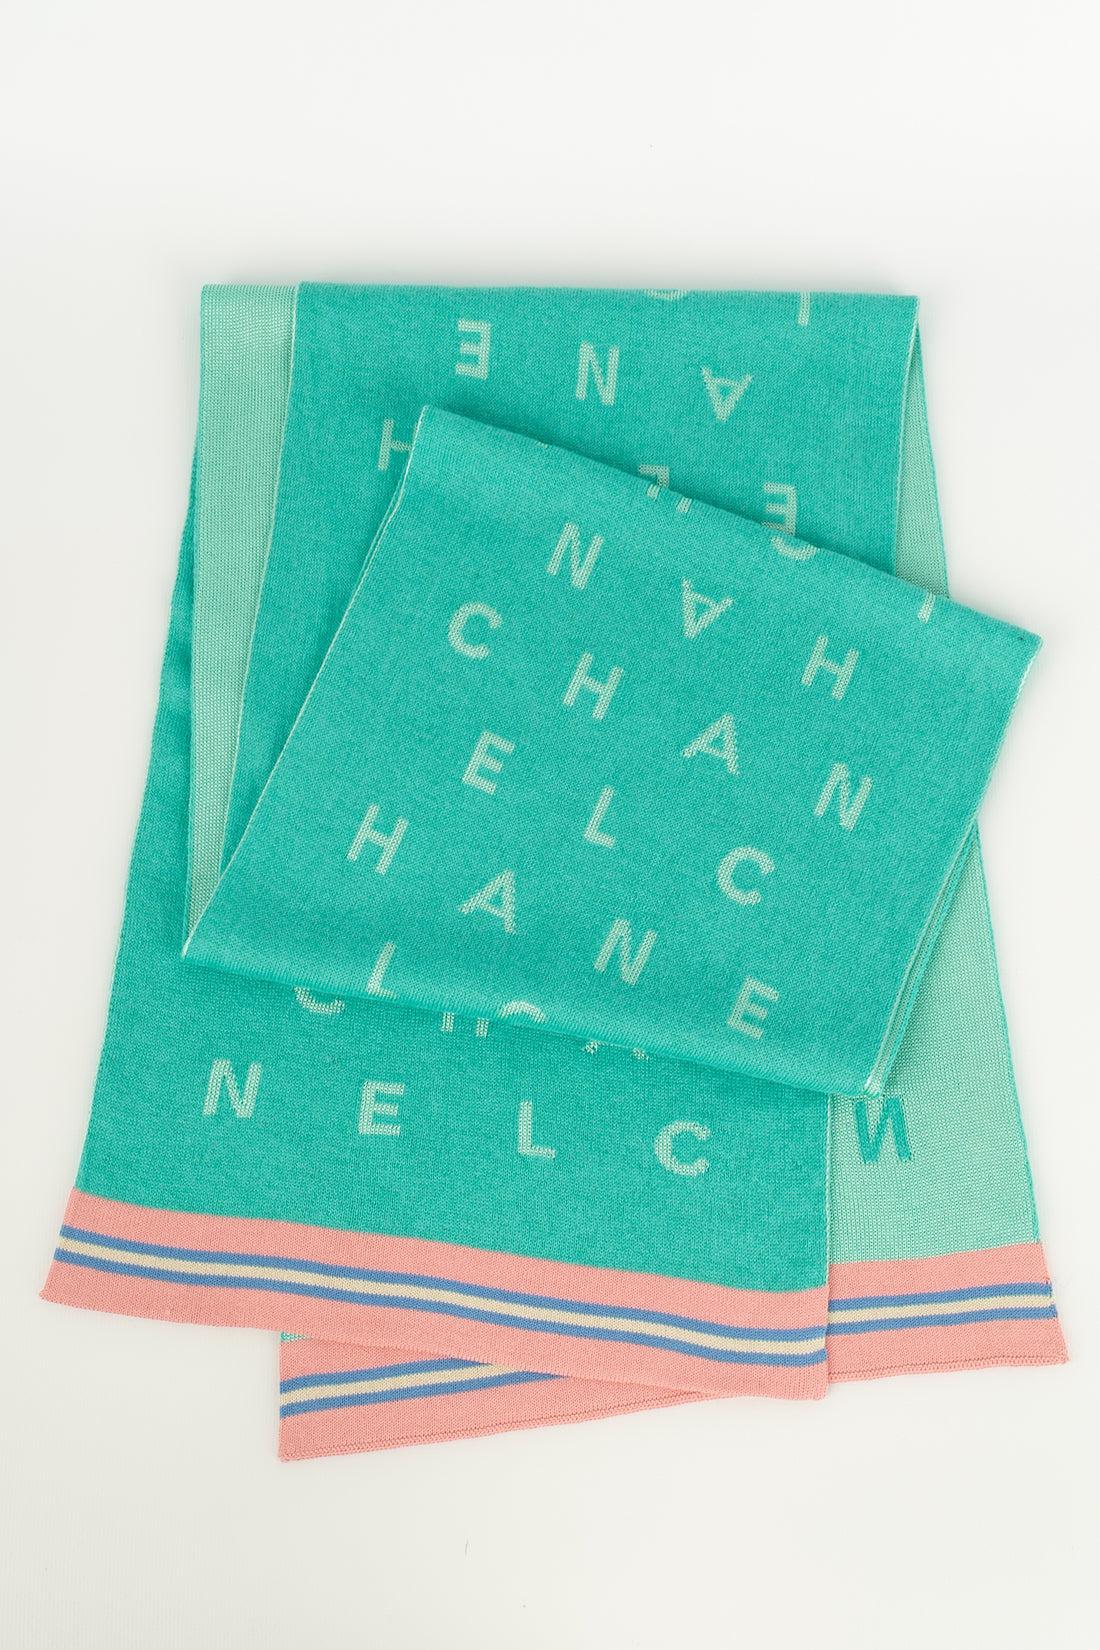 Chanel - Green knitted scarf bordered with pink and blue stripes. Label of the composition is not attached.
 
Additional information:
Dimensions: Length: 200 cm
Condition: Good condition
Seller Ref number: ACC97